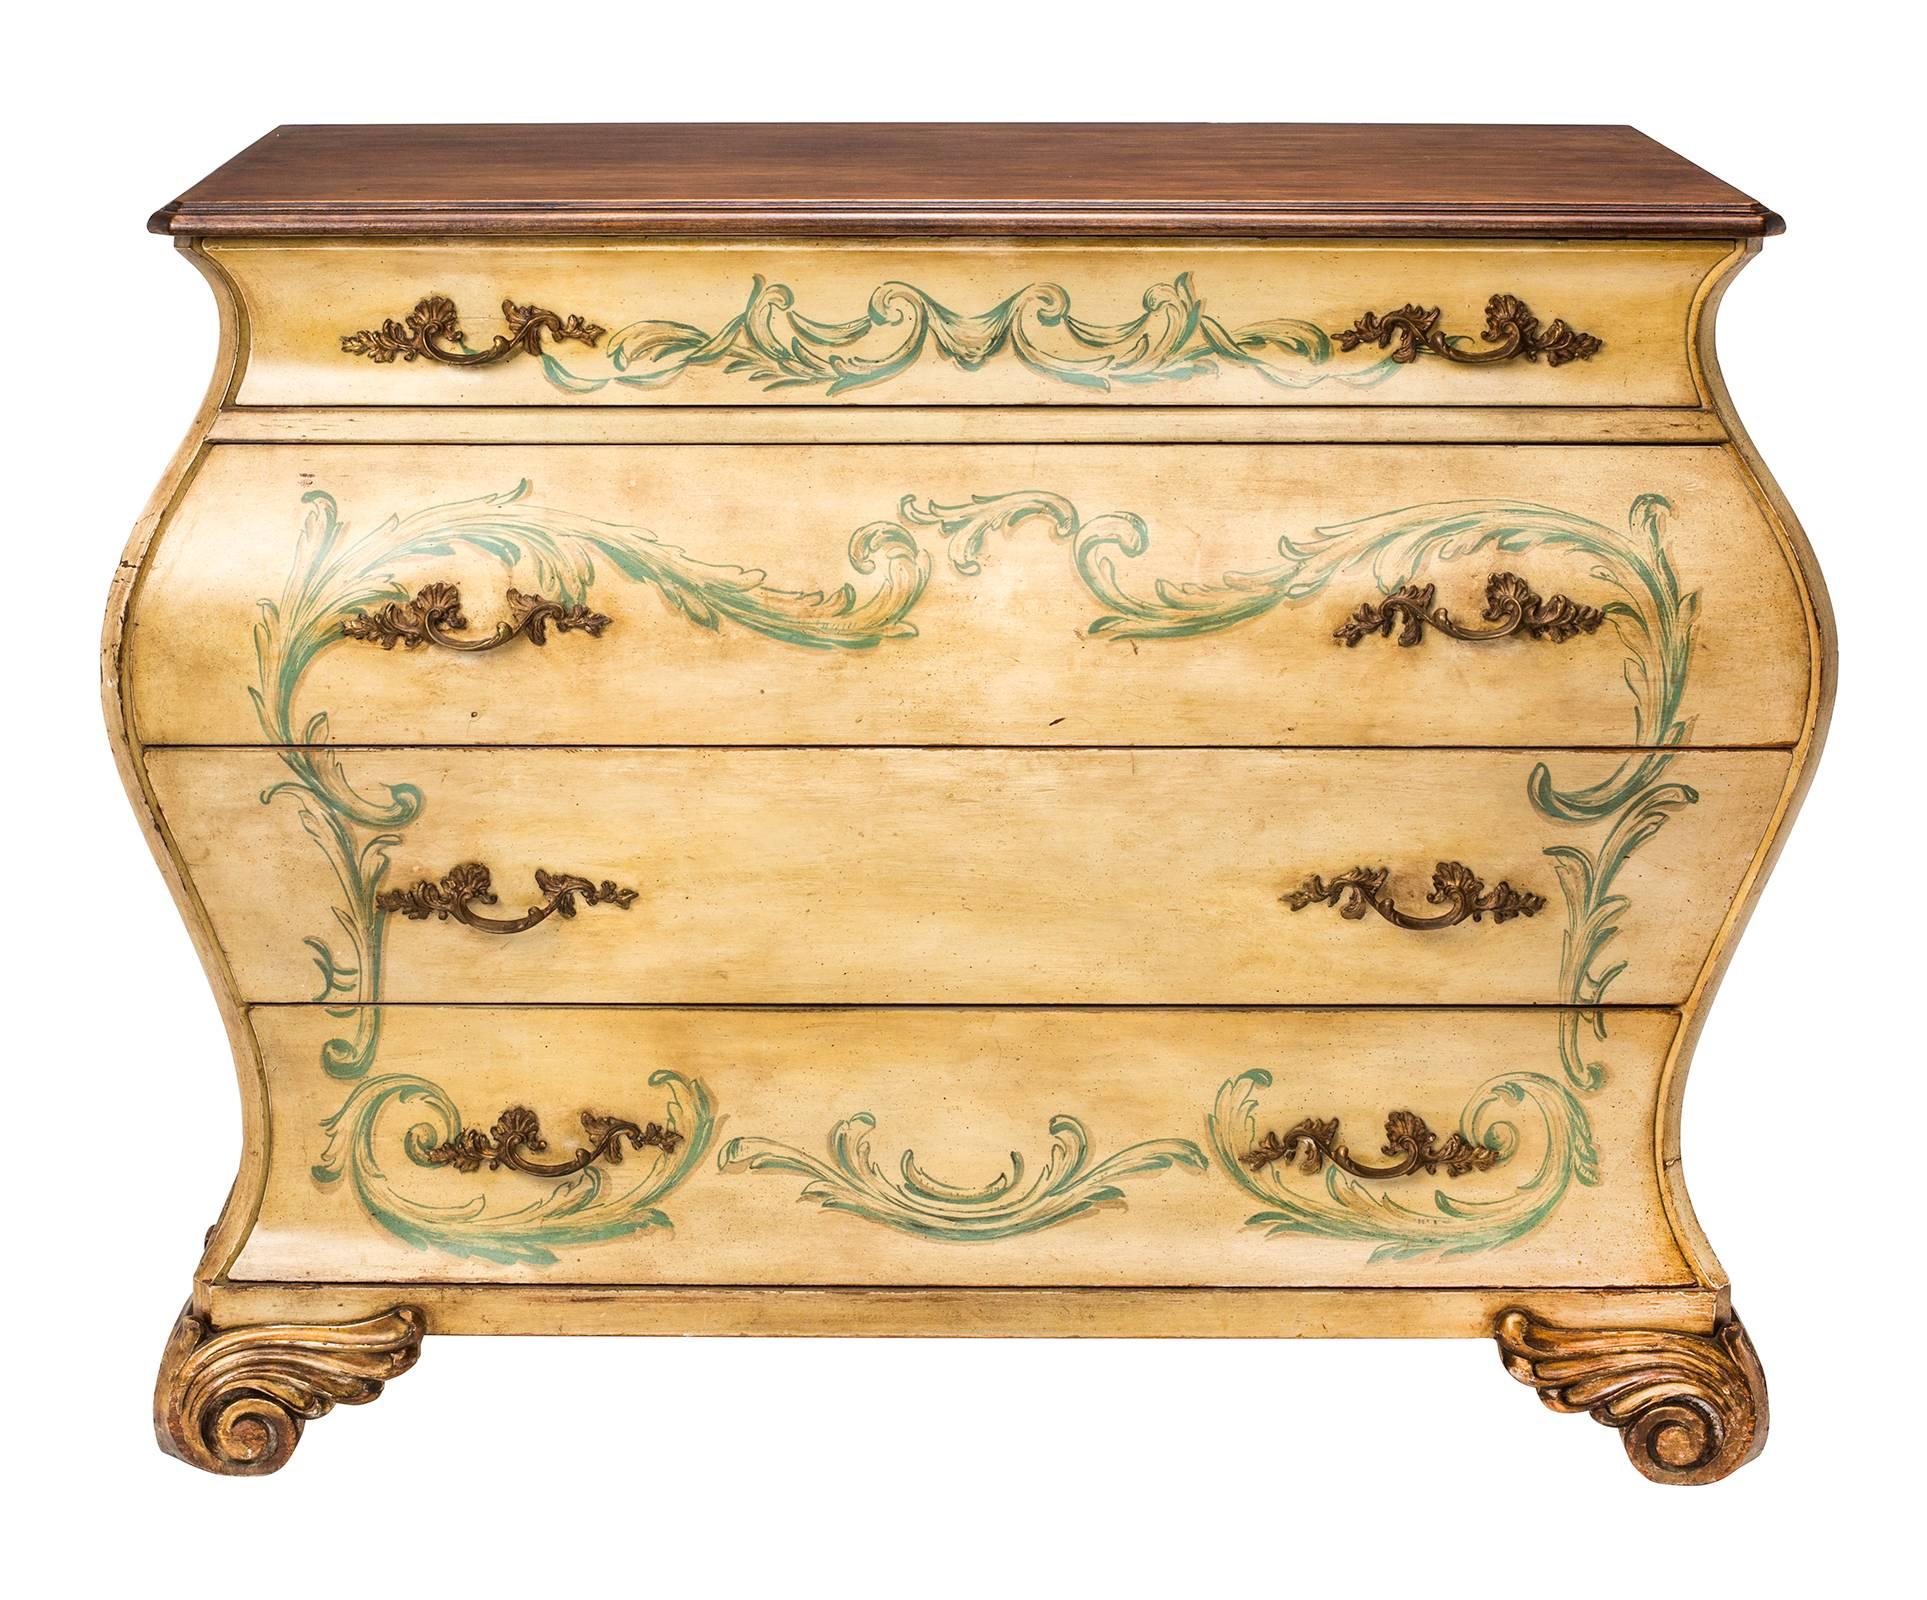 A wonderful painted Bombe chest of drawers. Graduating four drawers with lovely scrolled original gilt bronze hardware. Base is painted decoratively in yellow and green acanthus leaf scrolls. The top is stained in a dark walnut finish. Stands on